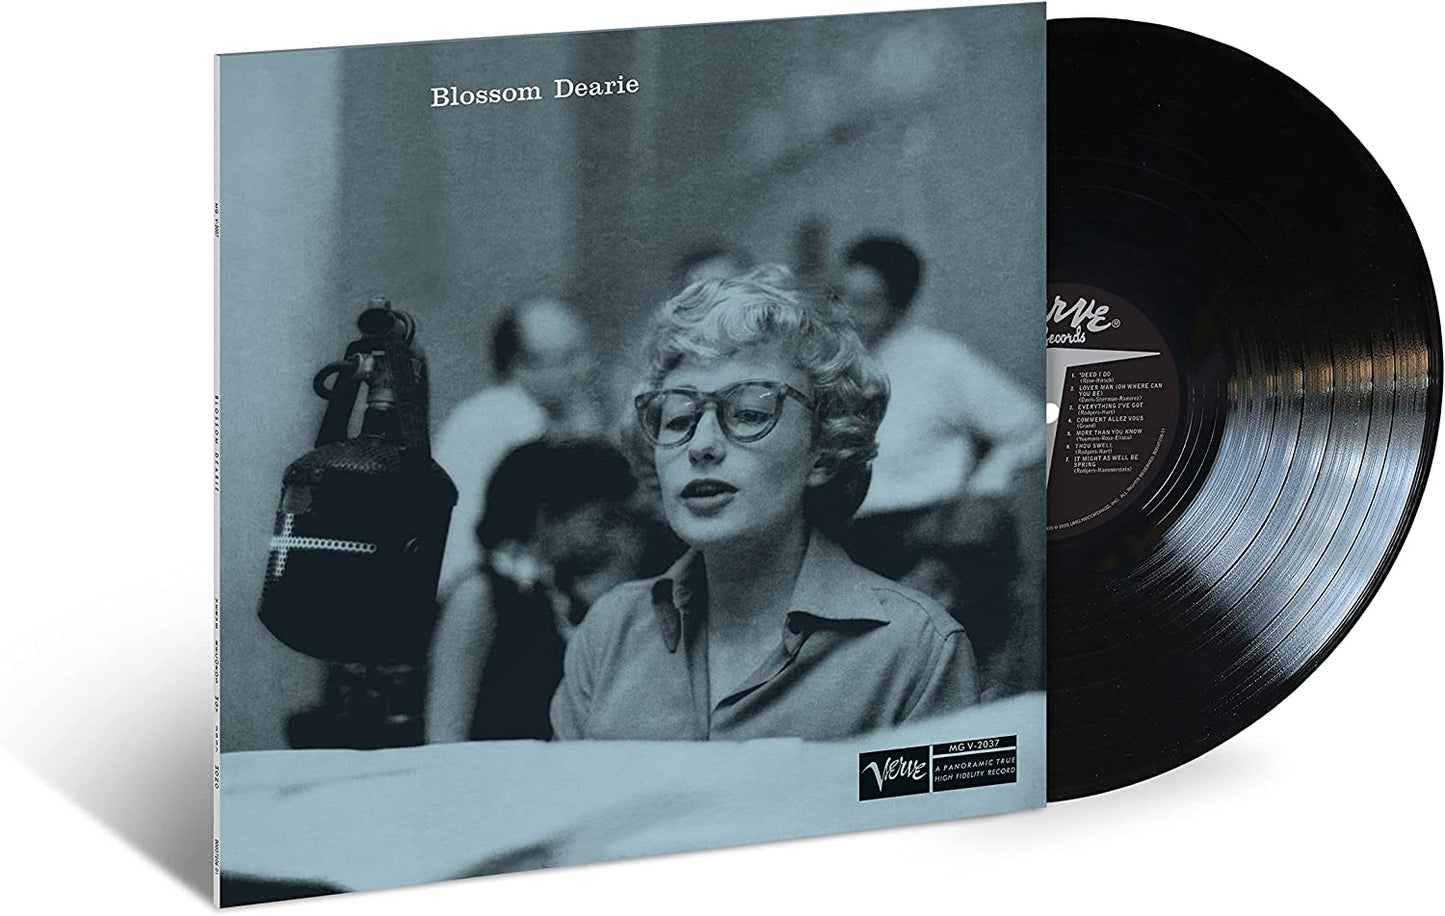 LP - Blossom Dearie - Blossom Dearie (Verve By Request Series)